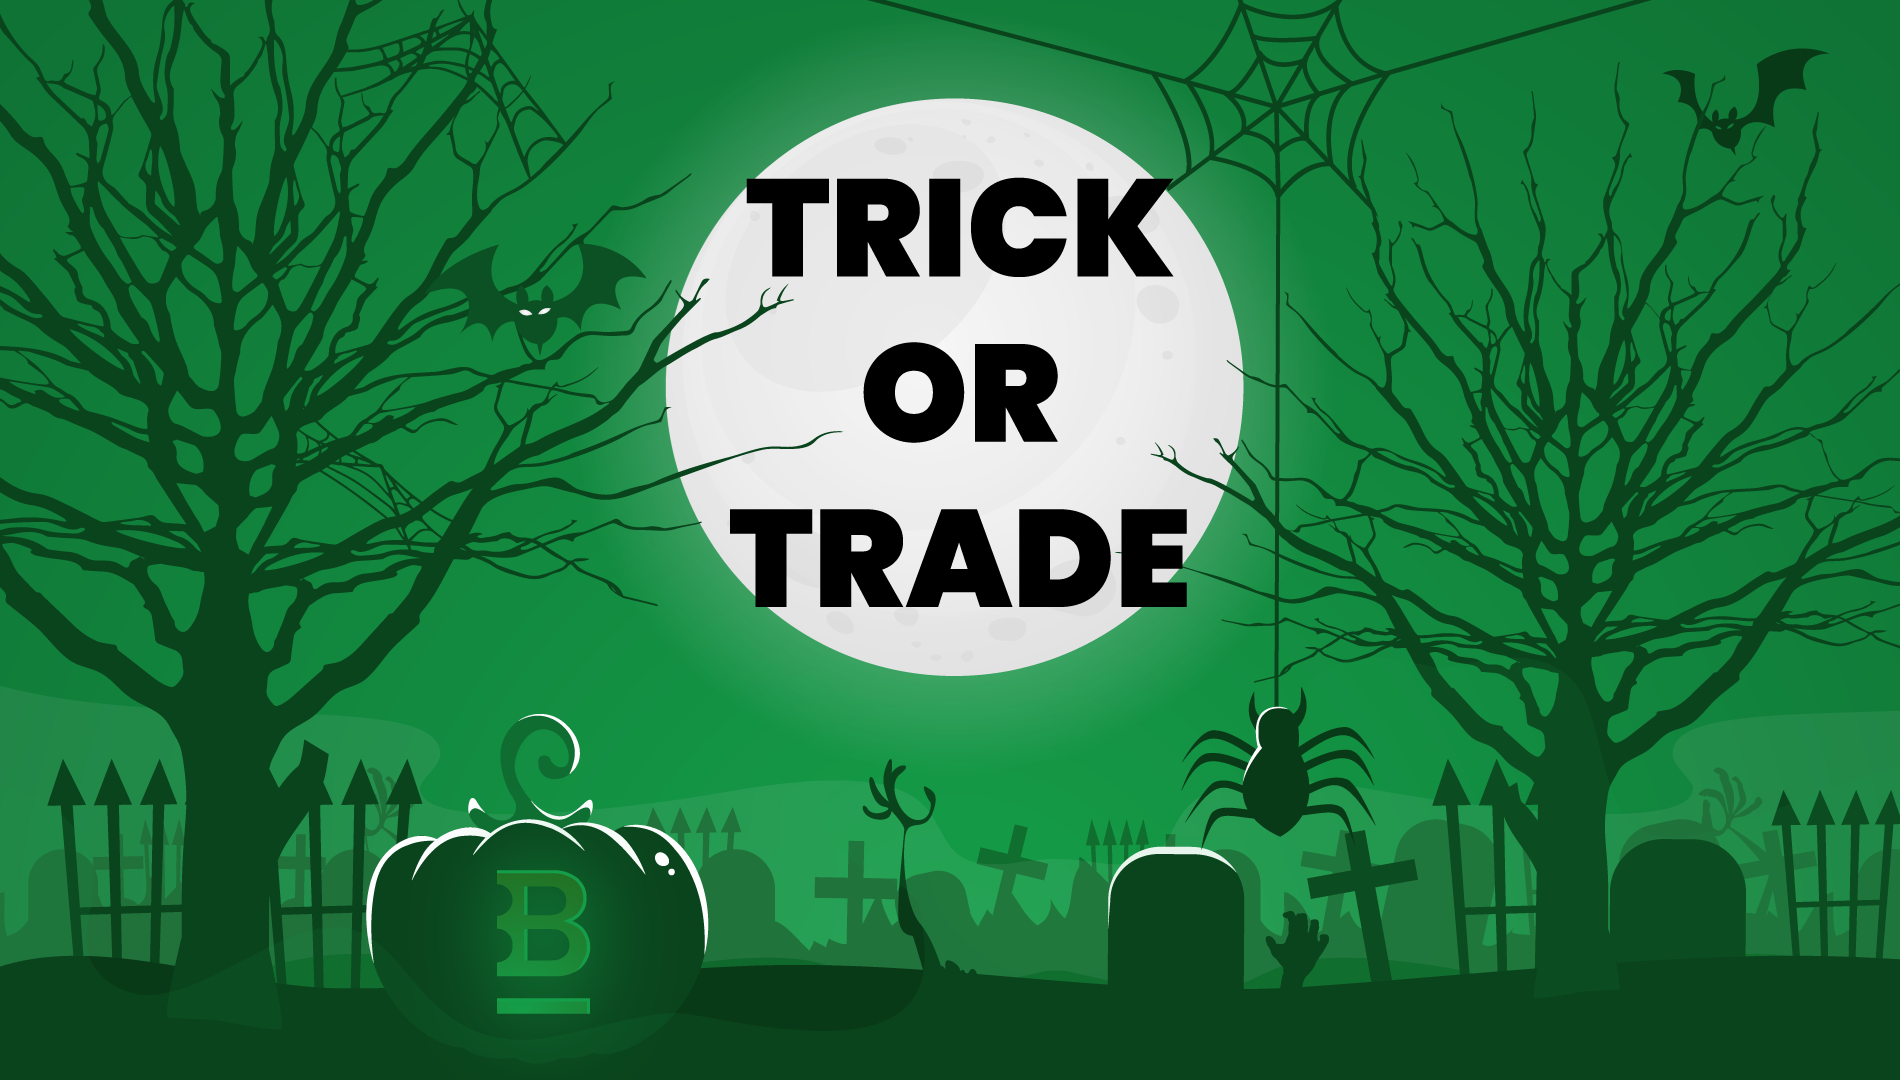 Boo! Guess the Bitcoin’s price and win a Halloween goodie bag! If you dare ...